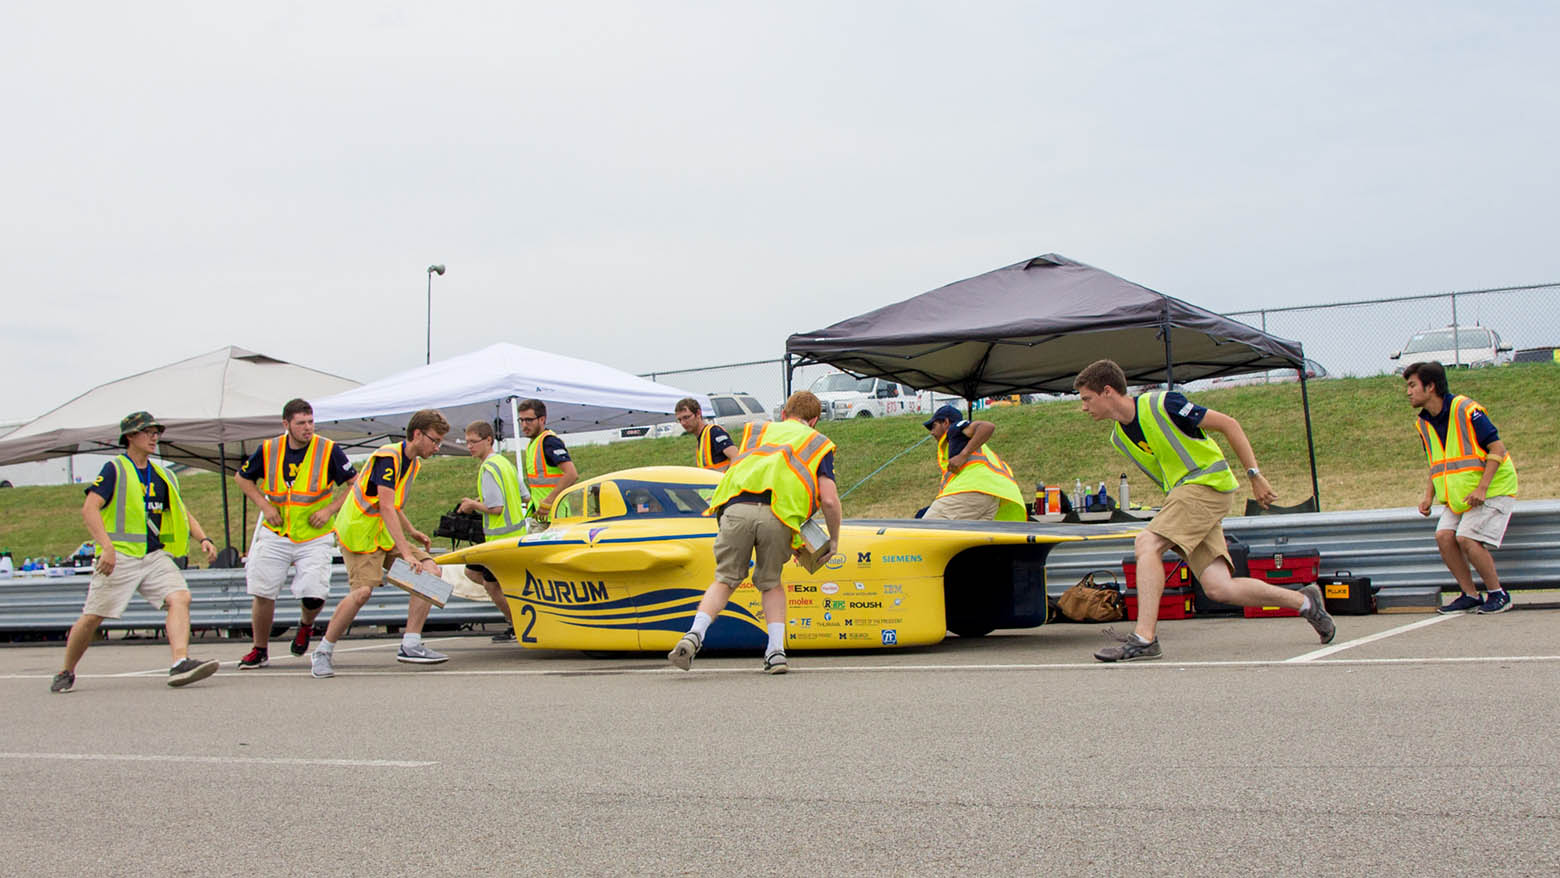 Members of the Michigan Solar Car team race to surround their car, Aurum, during a pit stop at the track.